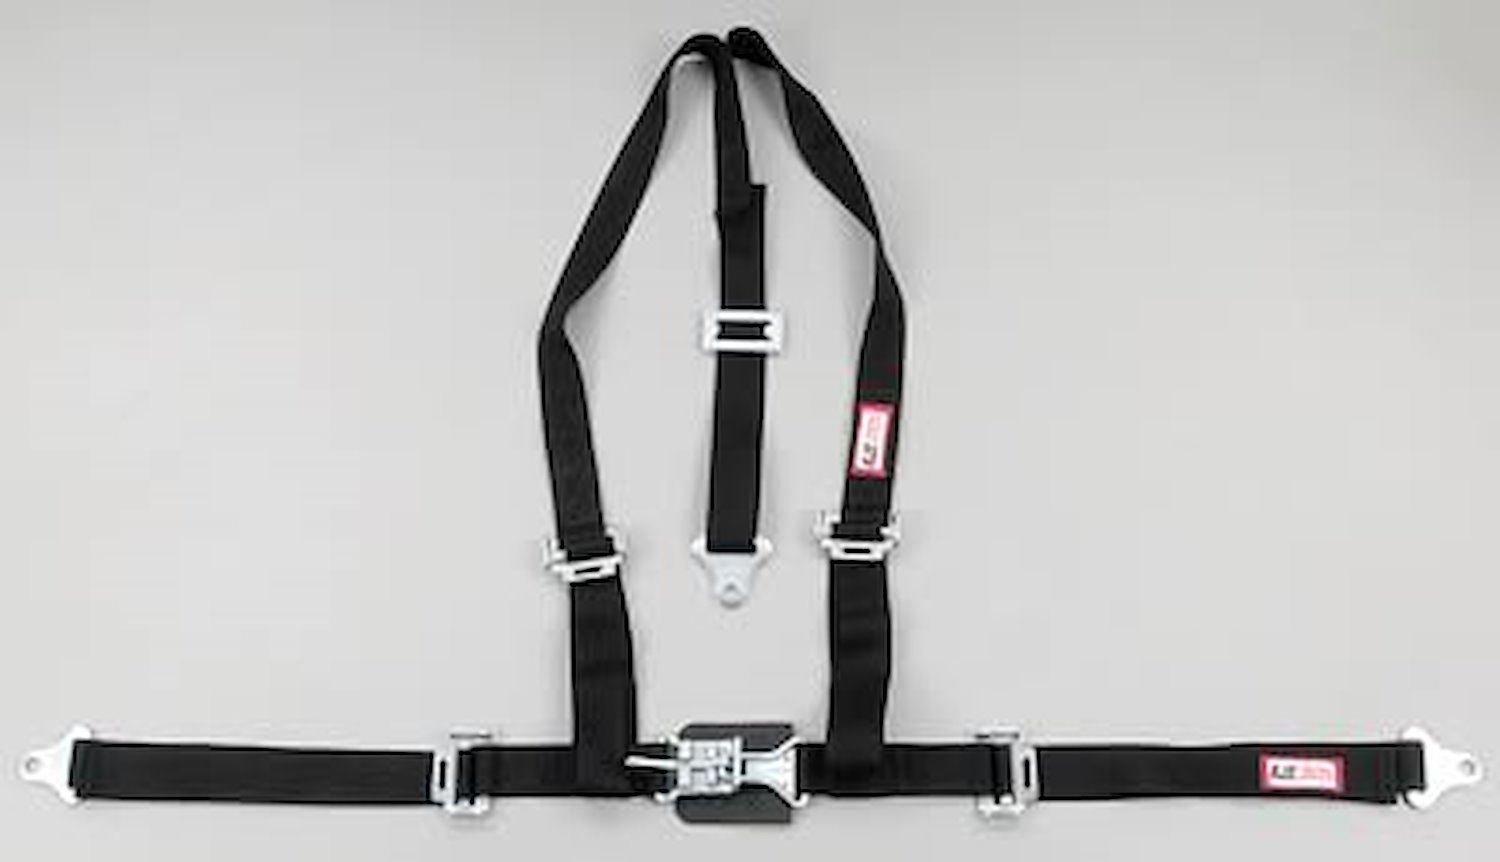 NON-SFI L&L HARNESS 2 PULL UP Lap Belt SEWN IN 2 S.H. V ROLL BAR Mount w/STERNUM STRAP ALL WRAP ENDS KHAKI